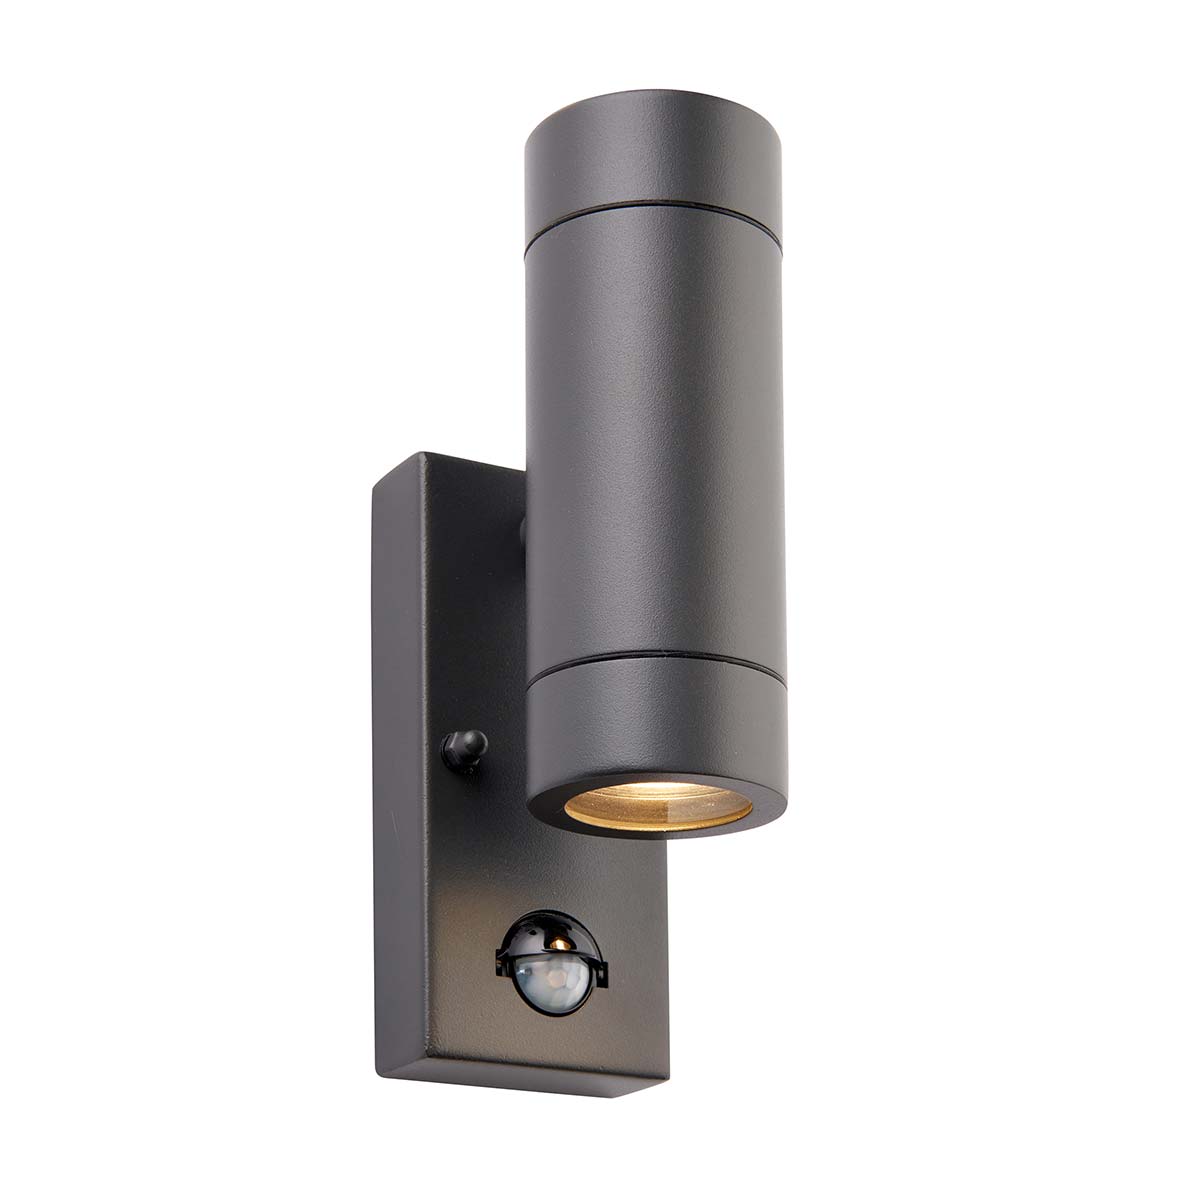 Palin 2 Light PIR Wall Light With Override Anthracite